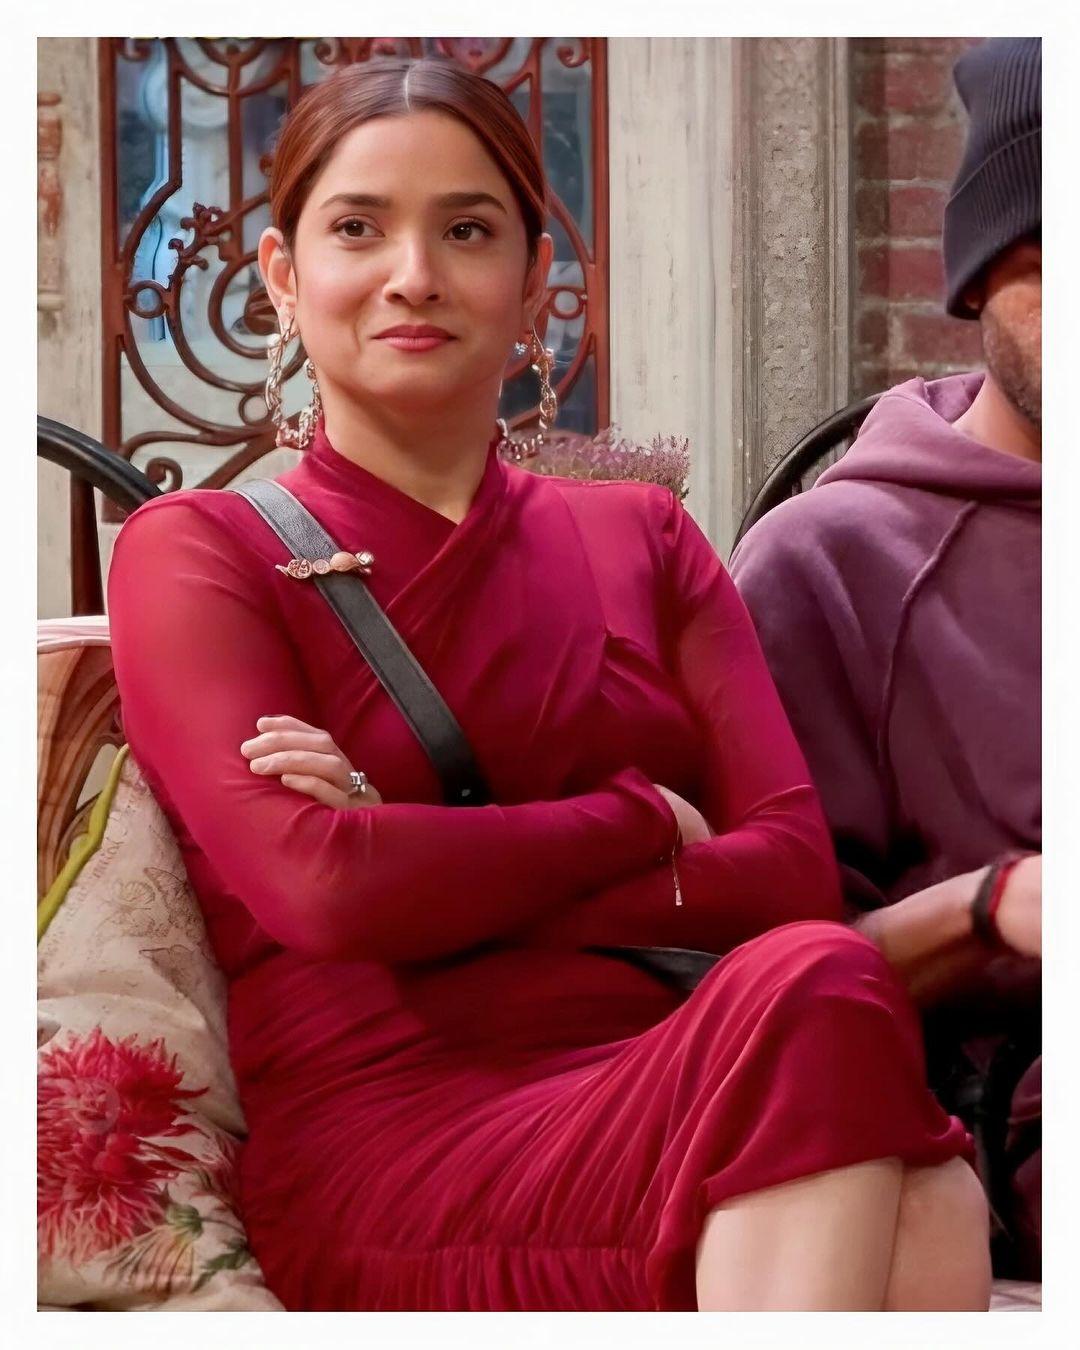 In one of the episodes, the actress decided to ace her look in a western outfit. She wore a stunning red dress and added big hoops. The messy bun elevated her appearance.